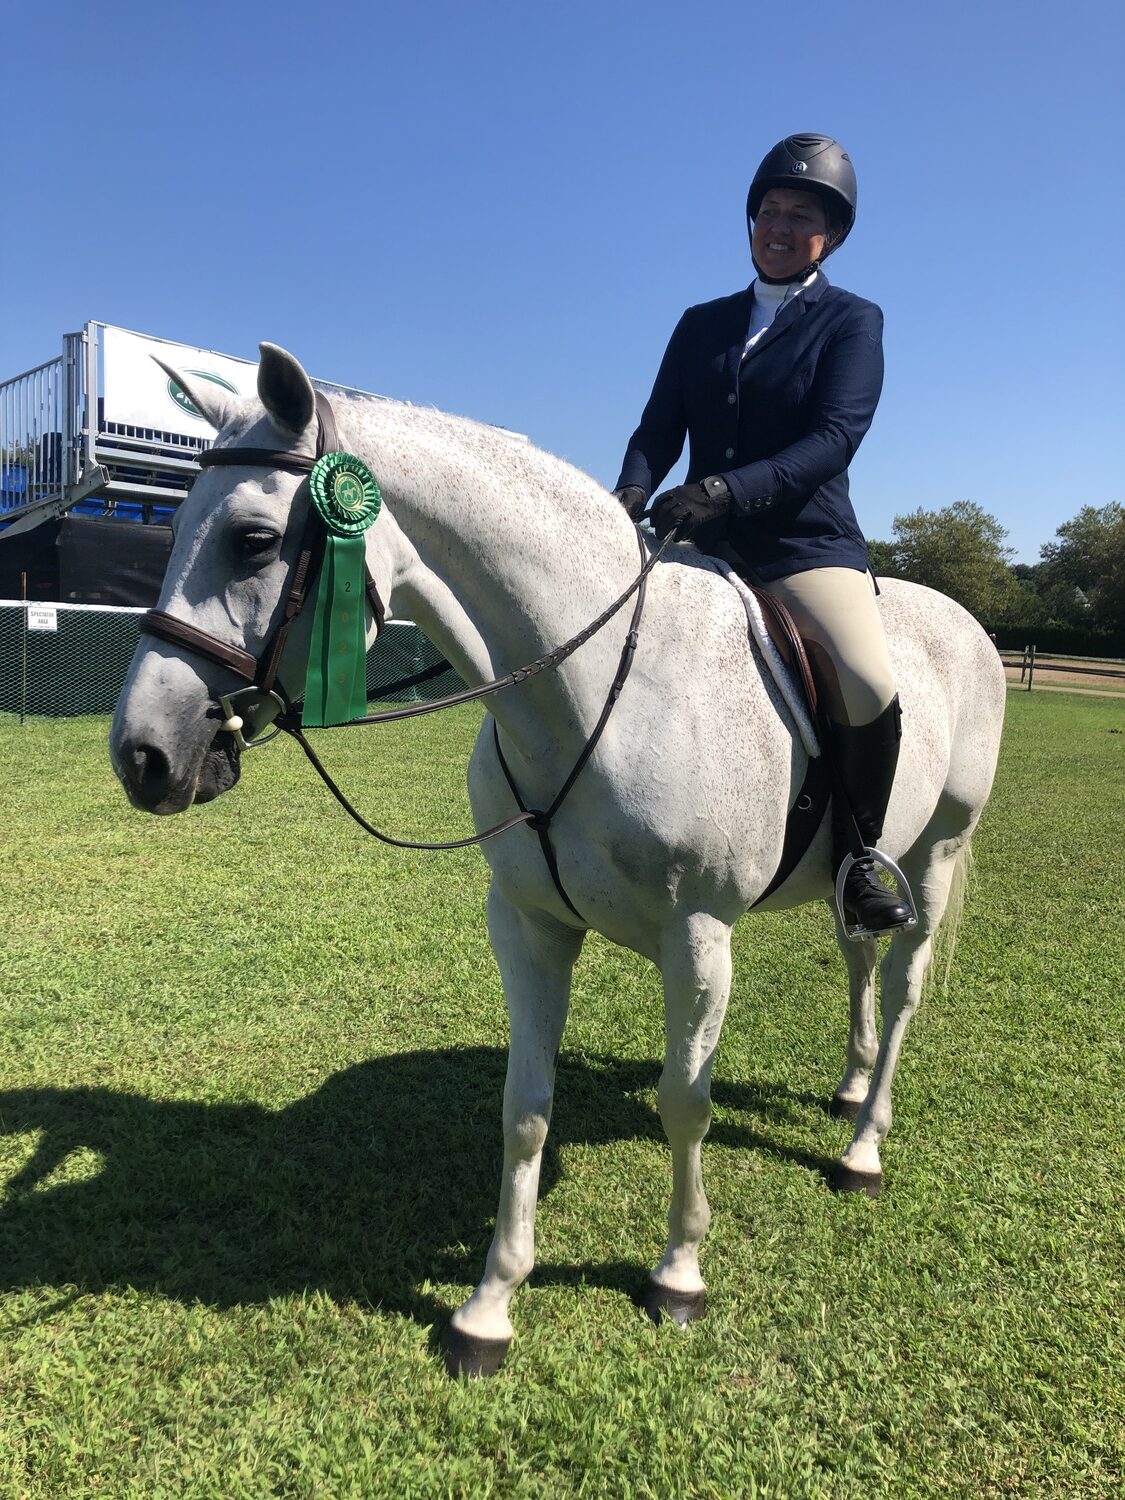 Susan Falkowski and her horse, Chunky Monkey, finished sixth in the adult equitation division. CAILIN RILEY